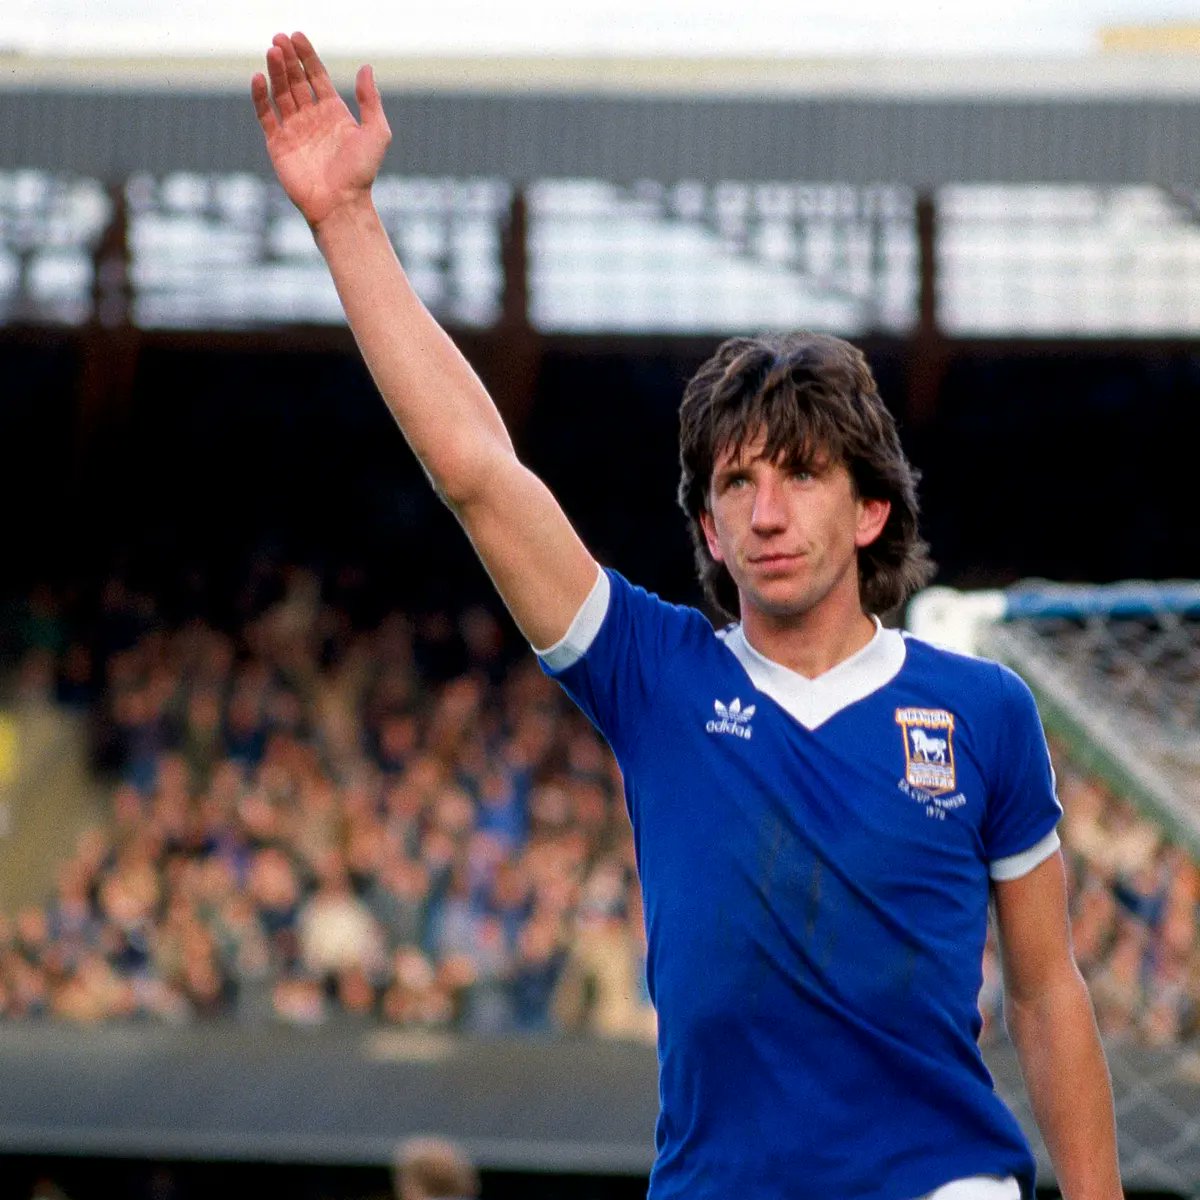 The Legend that is Paul Mariner will be looking down from Heaven with the biggest smile! What a fantastic Day! @IpswichTown @Argyle #itfc #pafc